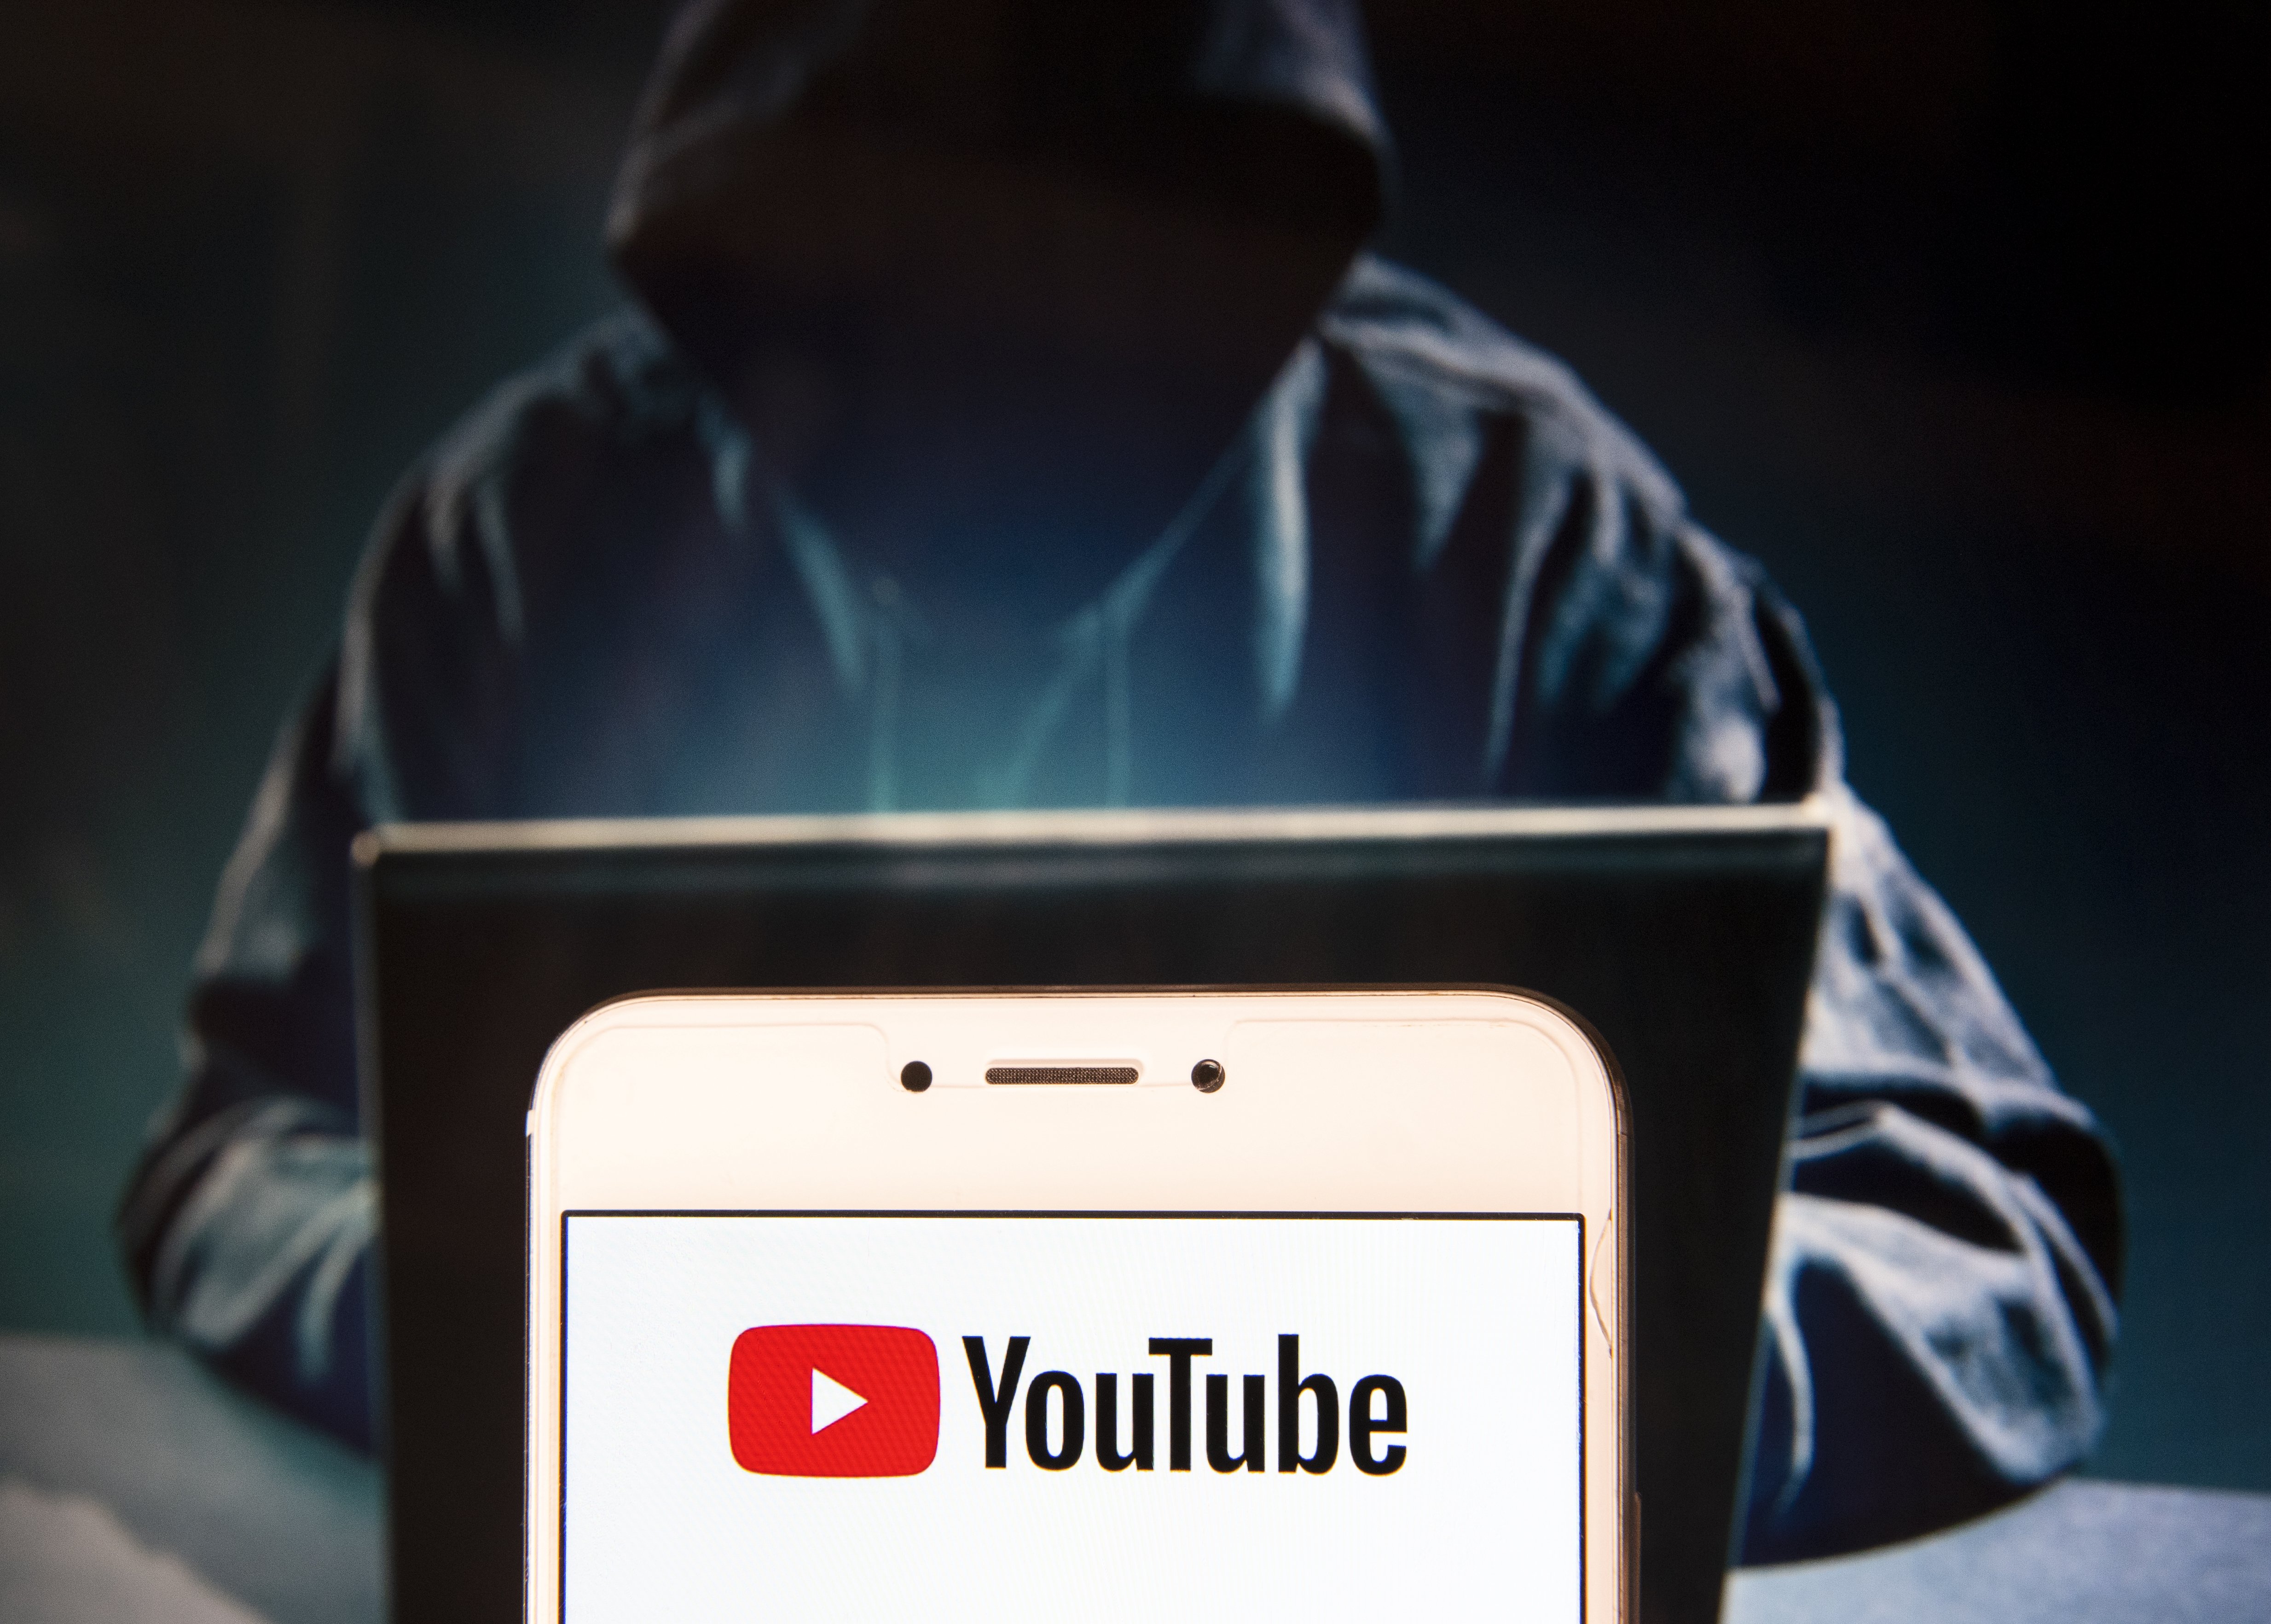 American video-sharing website Youtube logo is seen displayed on an Android mobile device with a figure of hacker in the background.